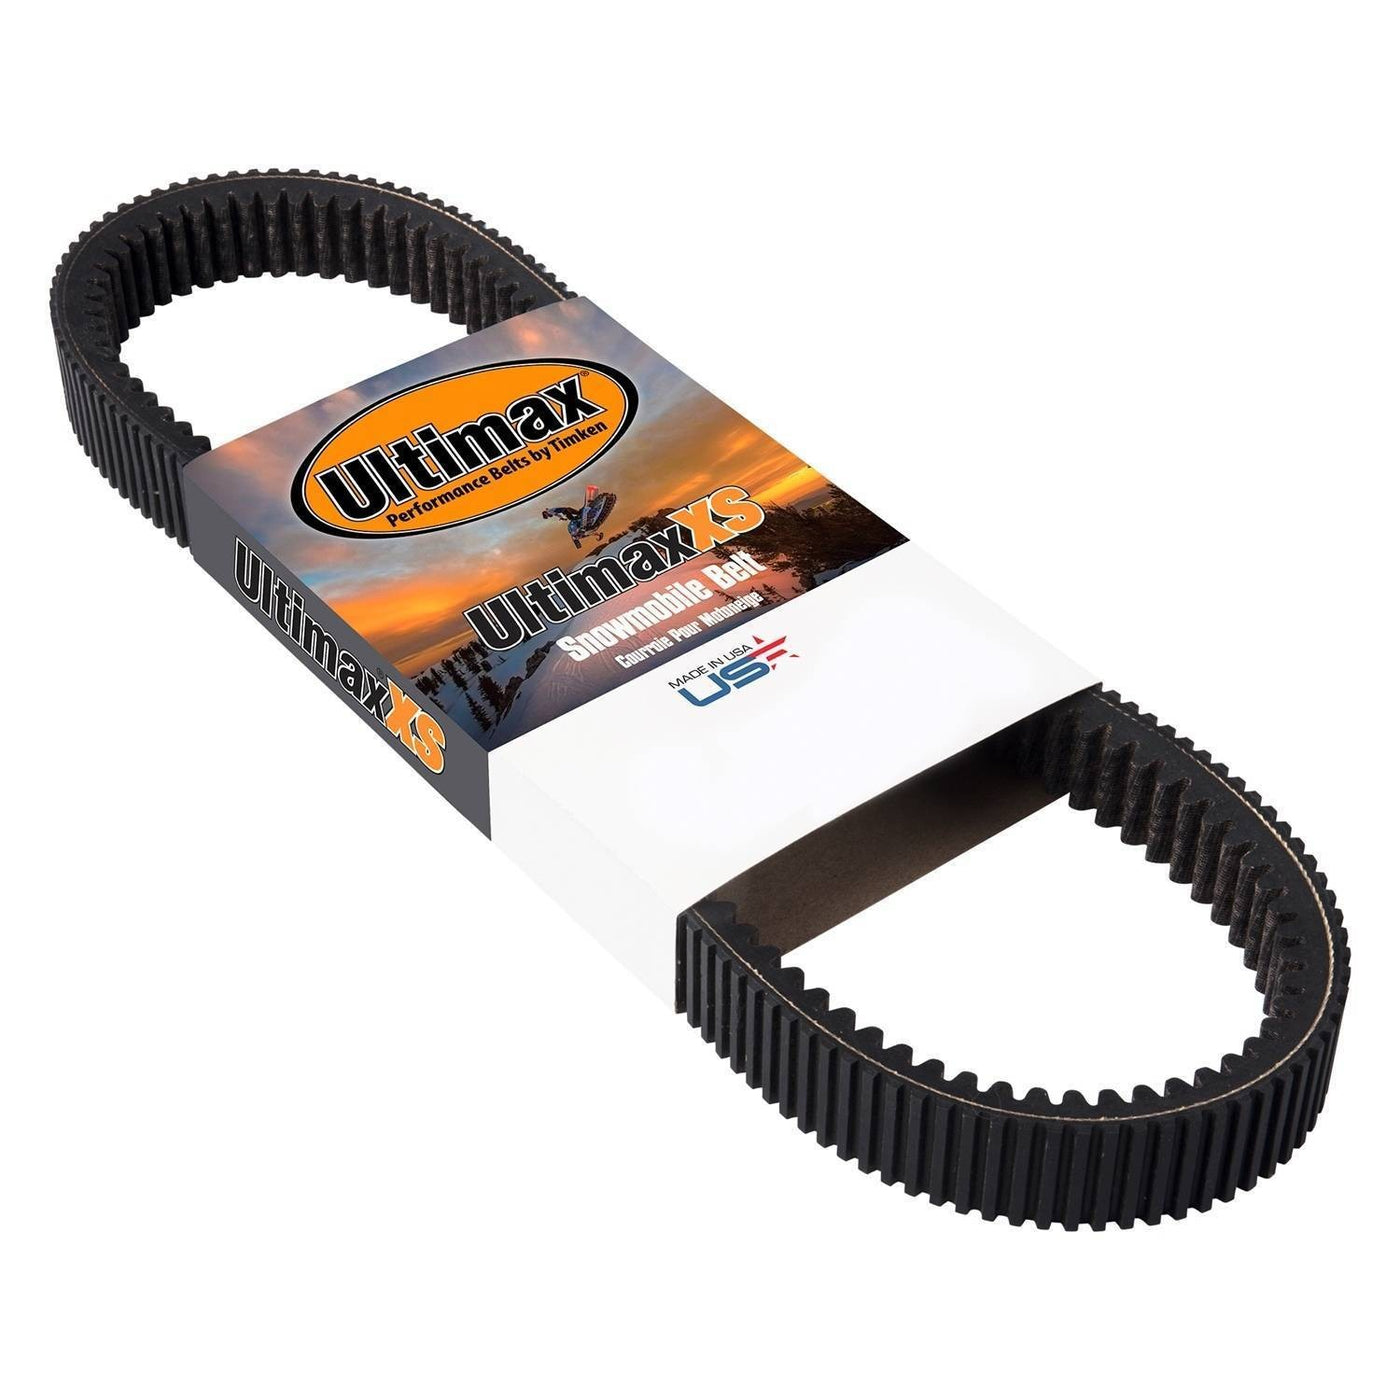 Carlisle  - Ultimax - XS822 Arctic Cat M8000 - Drive Belts available at SpecialtyMotorsports.ca